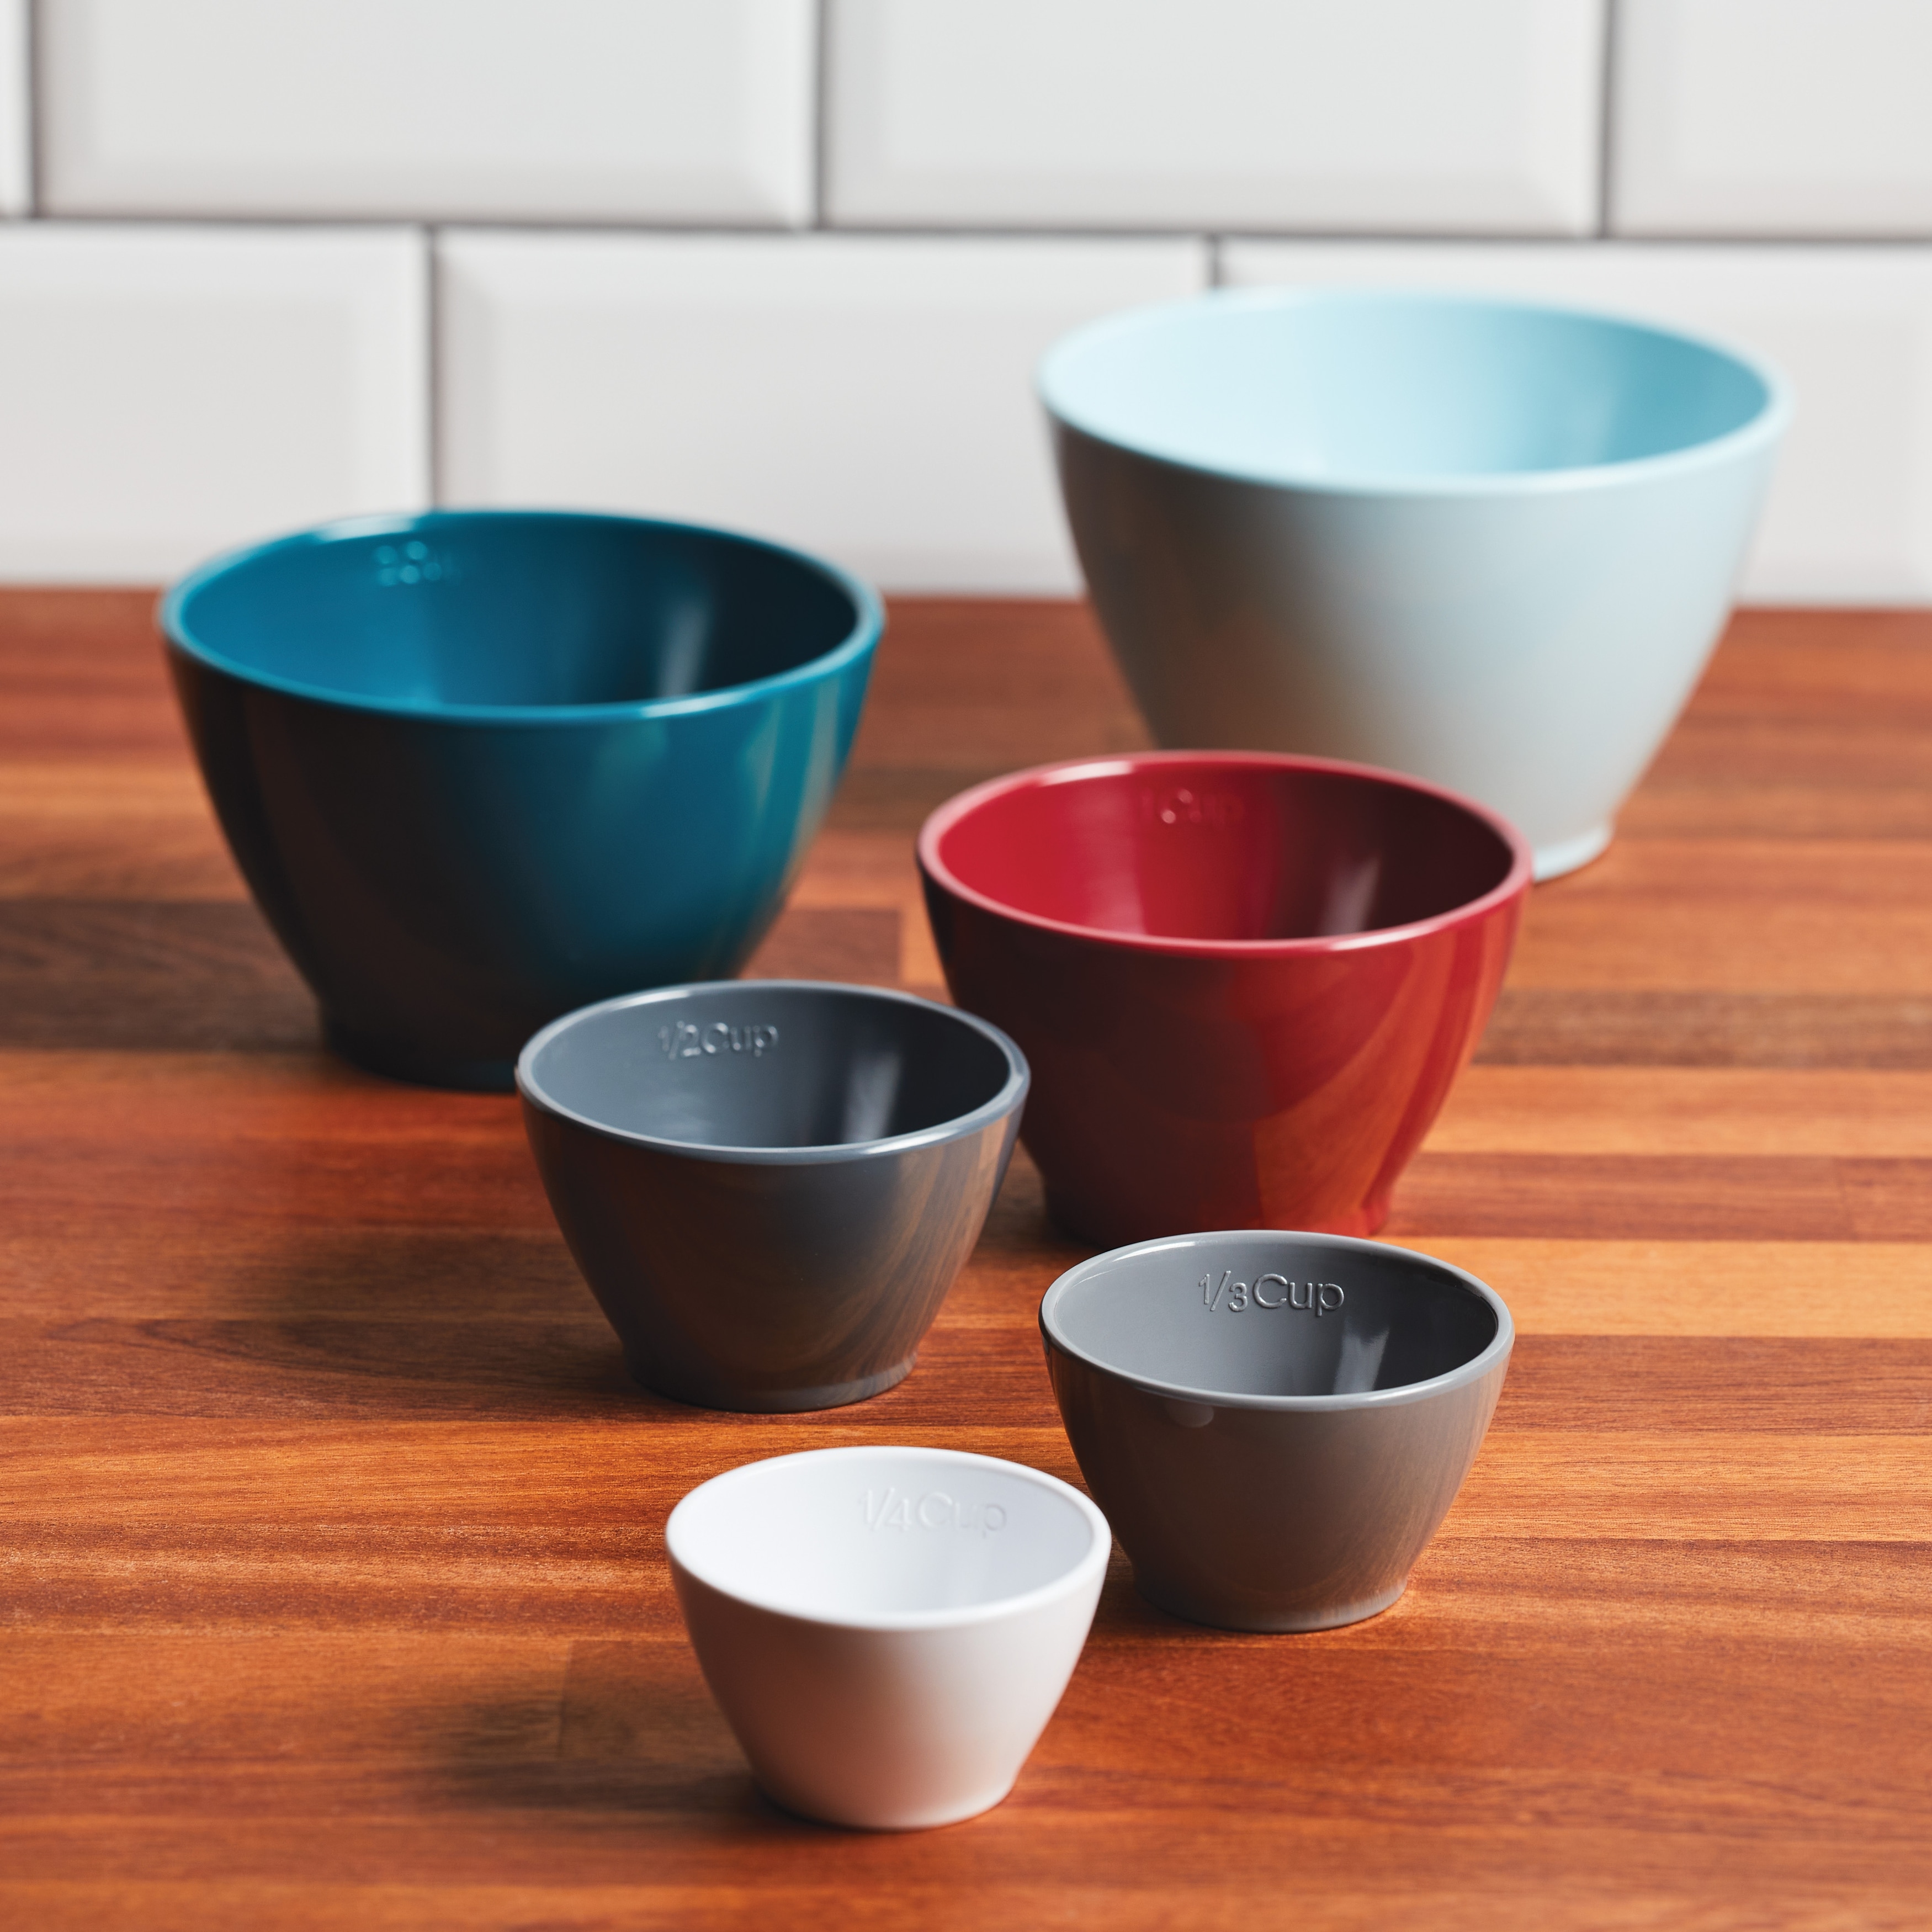 https://ak1.ostkcdn.com/images/products/is/images/direct/8e73ae1a275bab2779fb4dba52125823656e57f8/Rachael-Ray-Create-Delicious-Melamine-Nesting-Measuring-Cups%2C-6-Piece%2C-Assorted-Colors.jpg